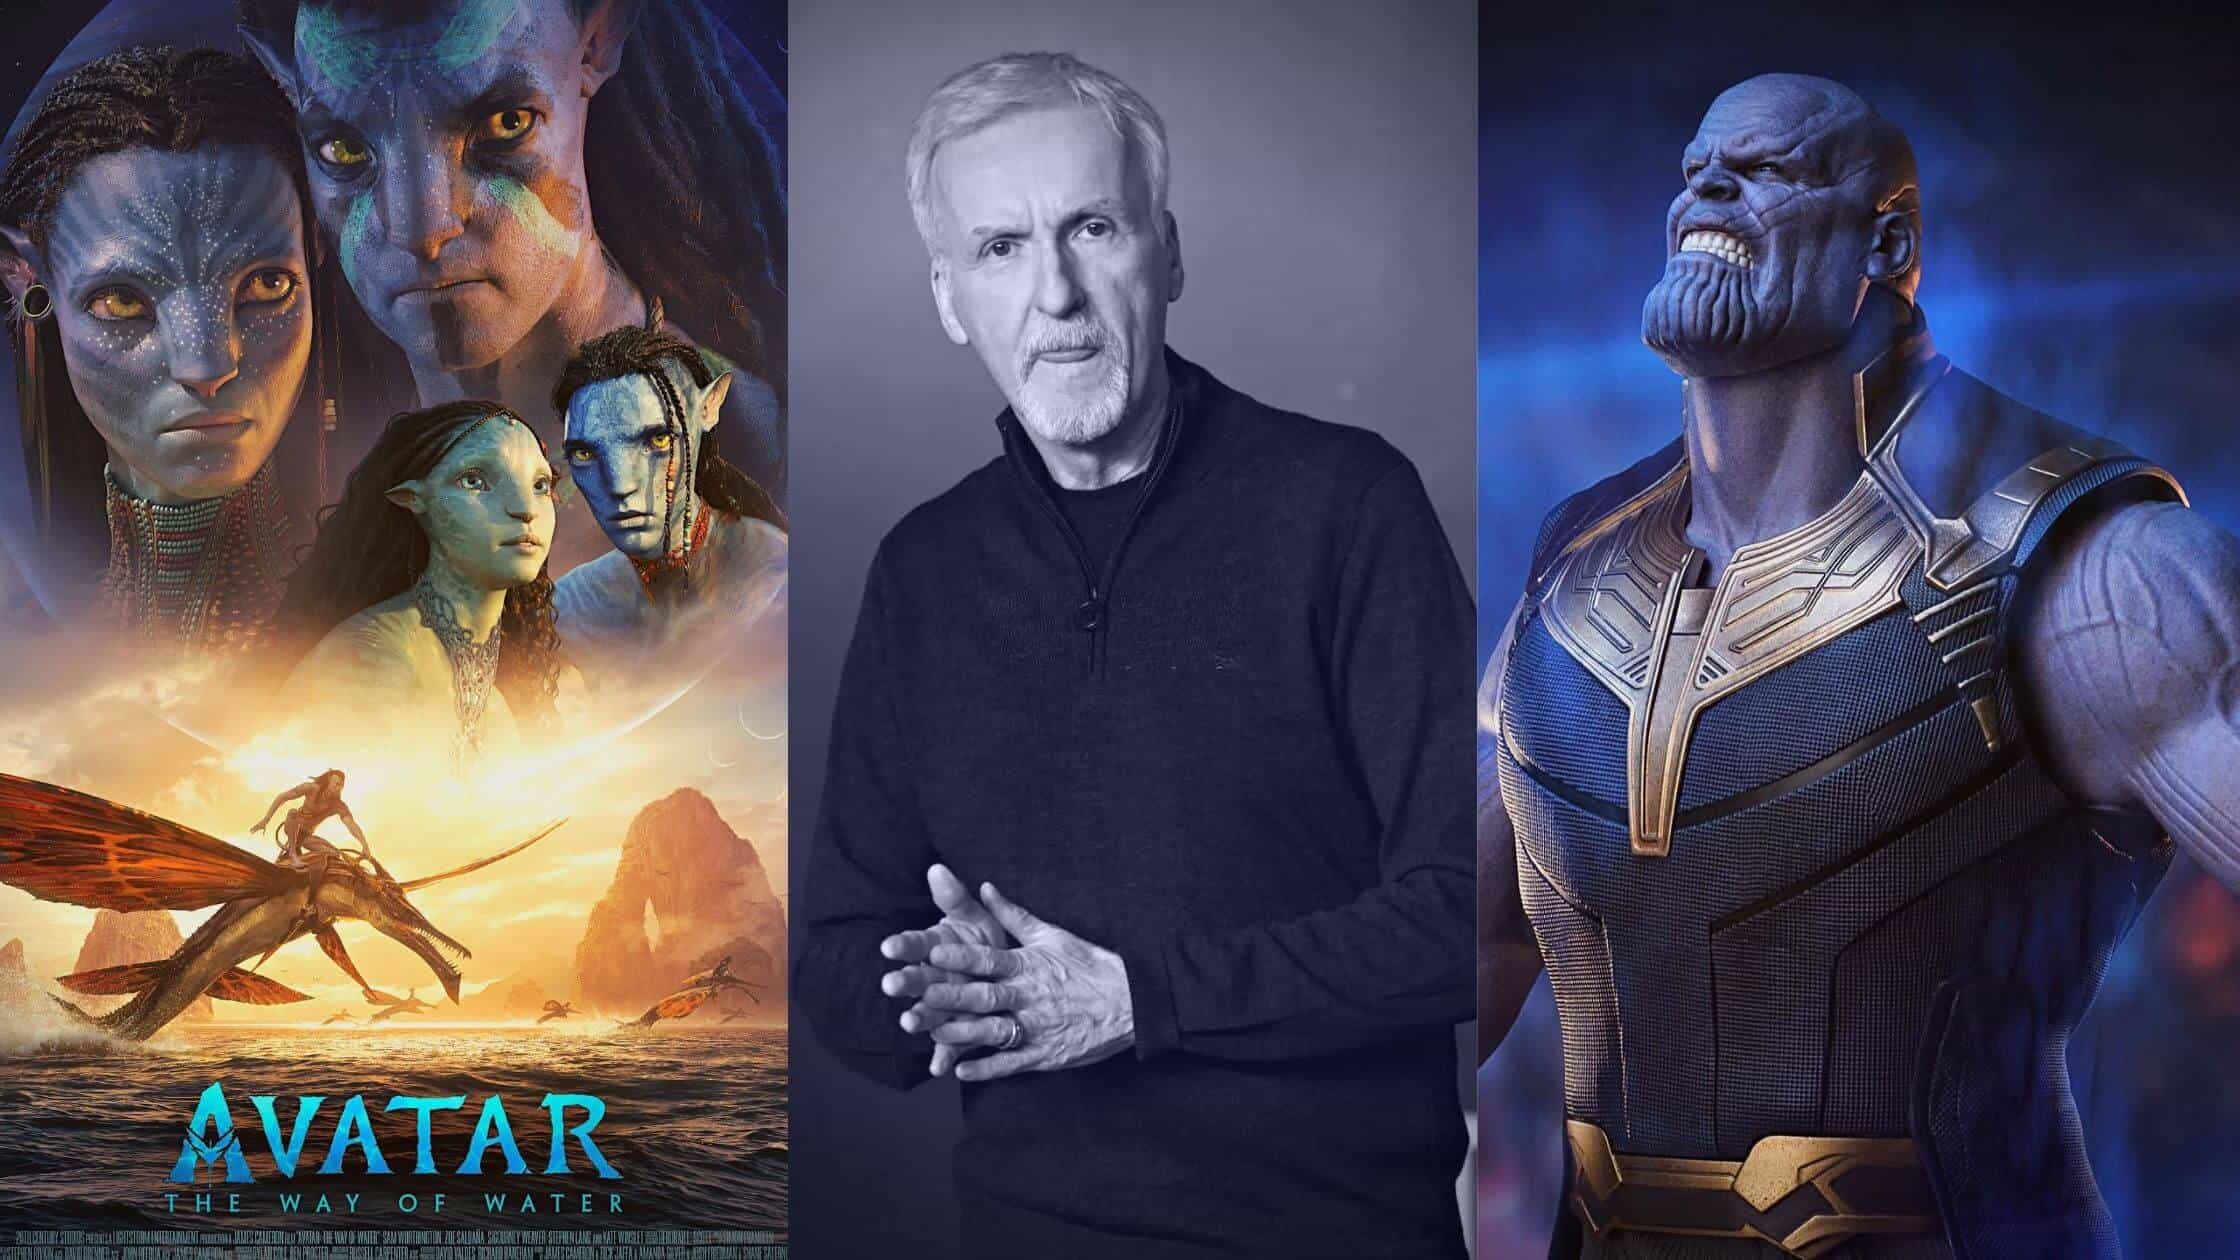 James Cameron Criticises Marvel Vfx As Being "Not Even Close" To "Avatar"